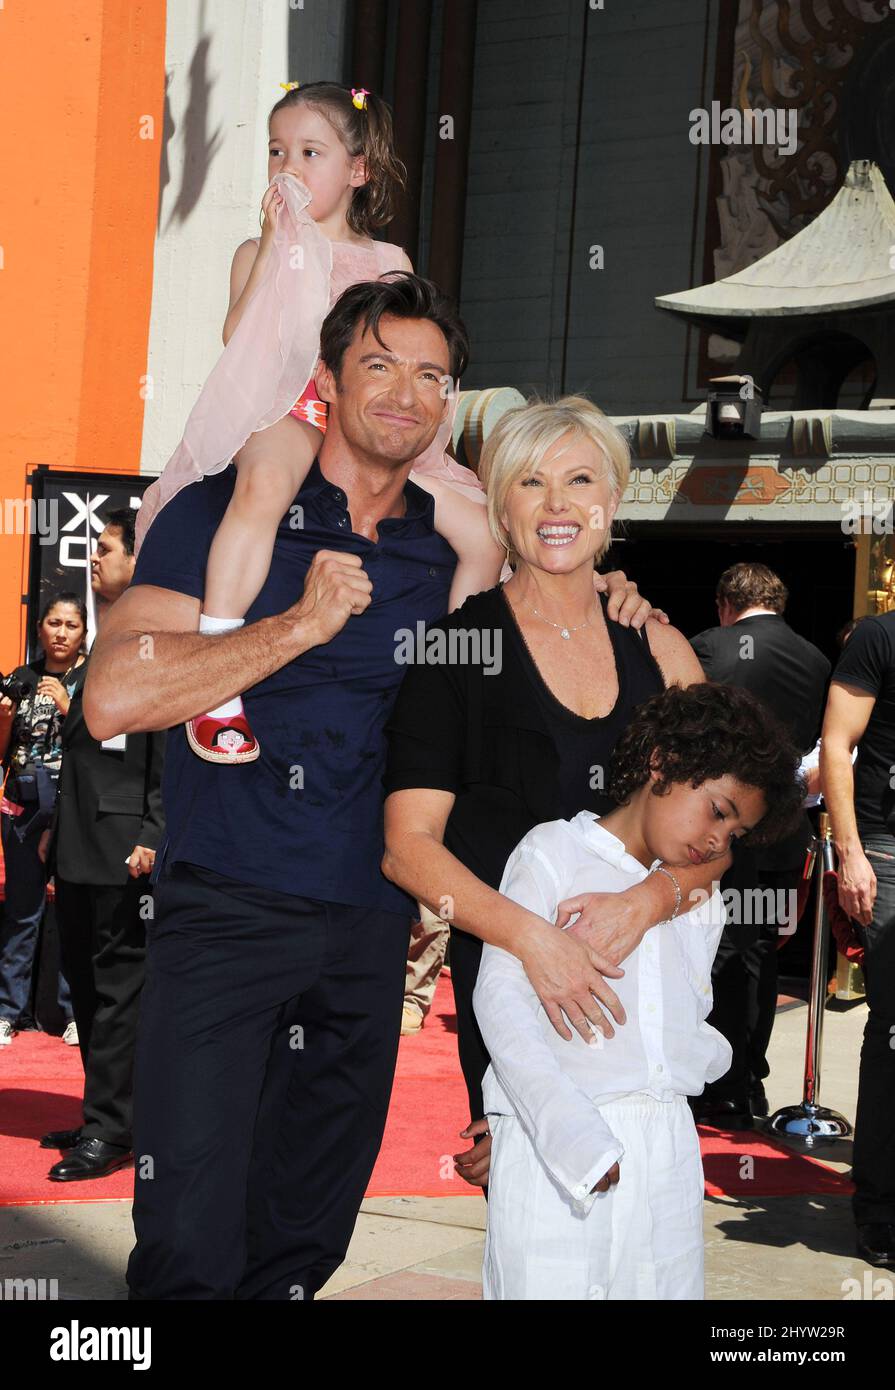 Hugh Jackman, Deborah Lee Furness with son Oscar and daughter Ava at the Hugh Jackman Hand and Footprint Ceremony, held at Grauman's Chinese Theatre, Hollywood. Stock Photo